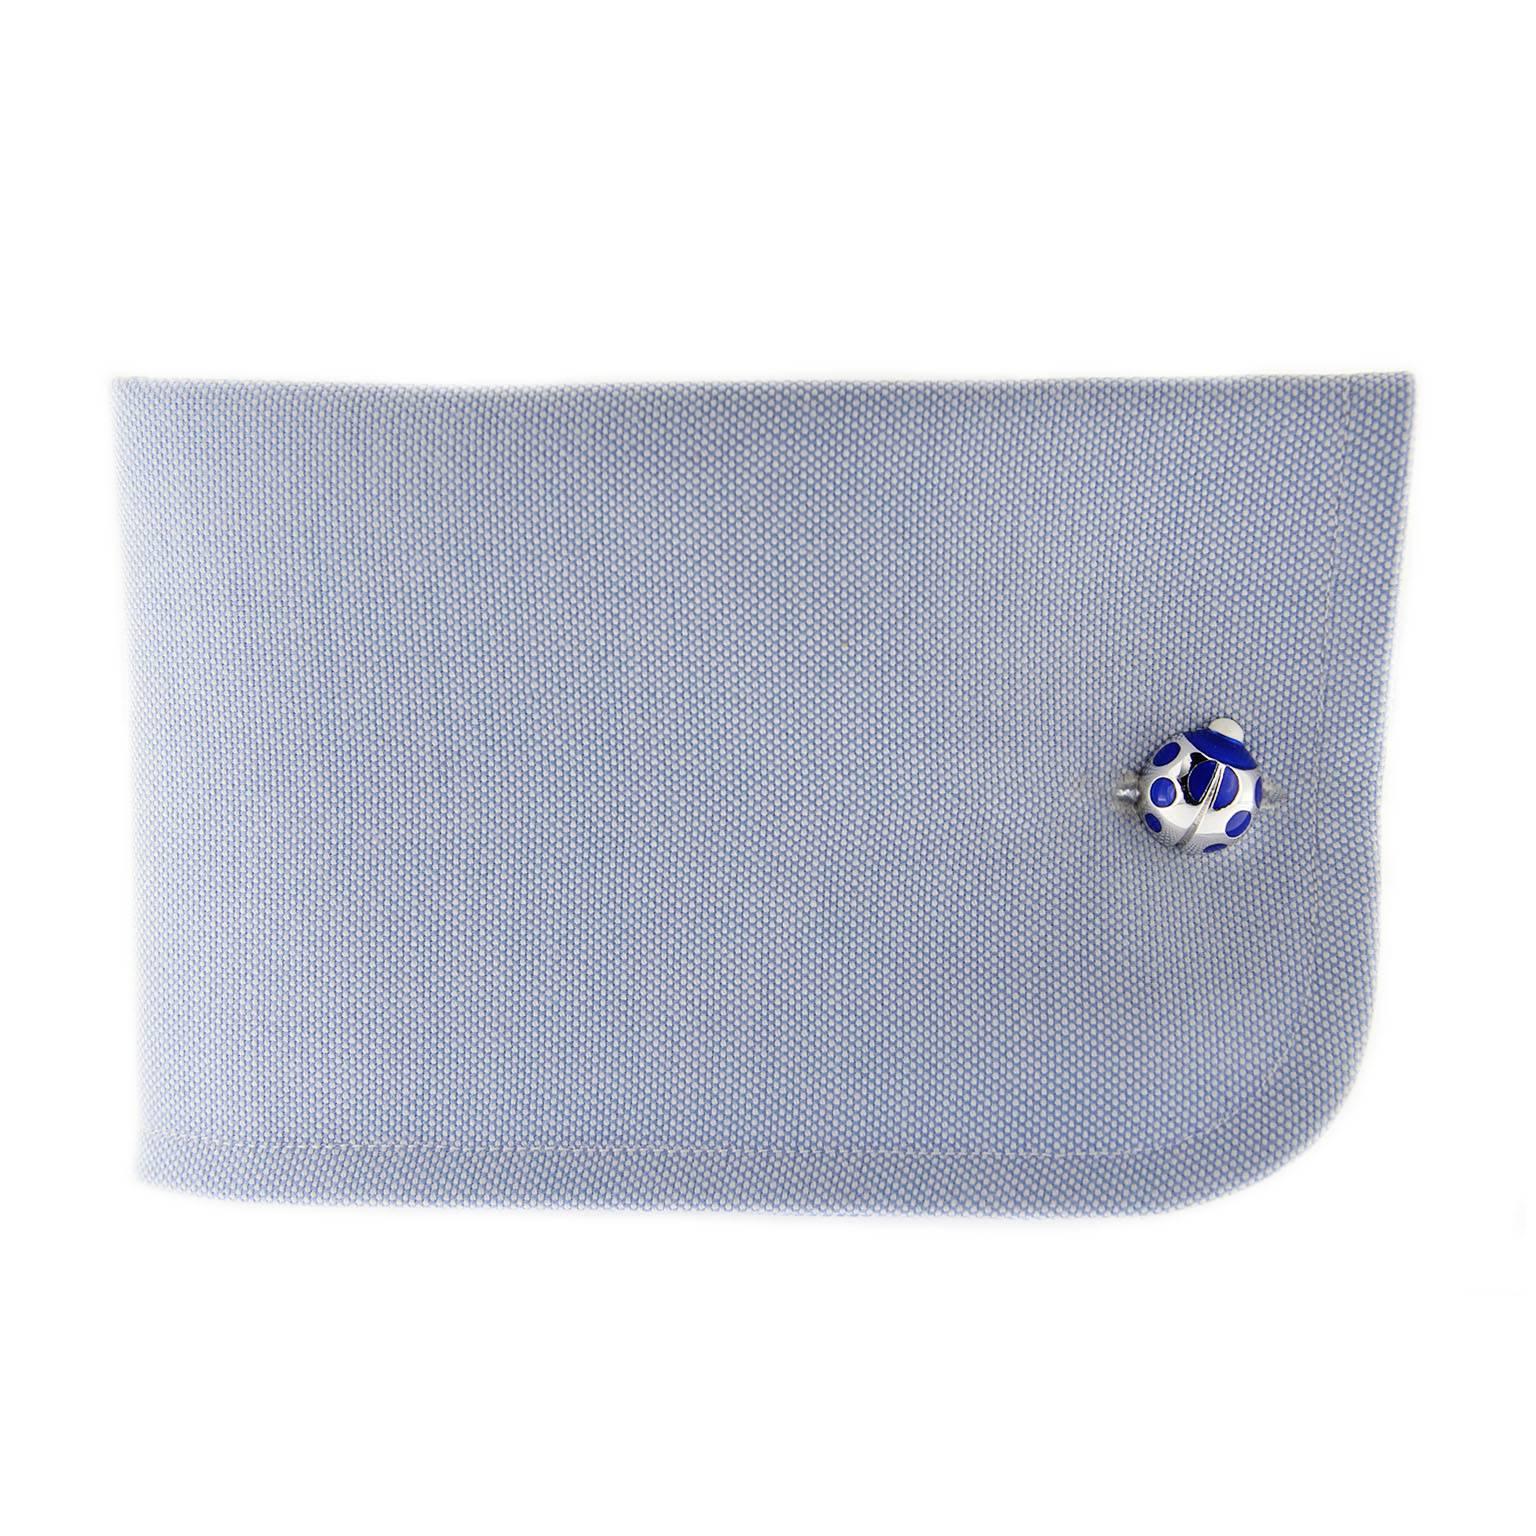 Jona design collection, hand crafted in Italy, rhodium plated Sterling Silver ladybug cufflinks with marine blue enamel.  

DIMENSIONS: 
0.44 in W x 0.50 in L x 0.23 in D 
11,17 mm W x 12,07 mm L x 5,84 mm D  

All Jona jewelry is new and has never